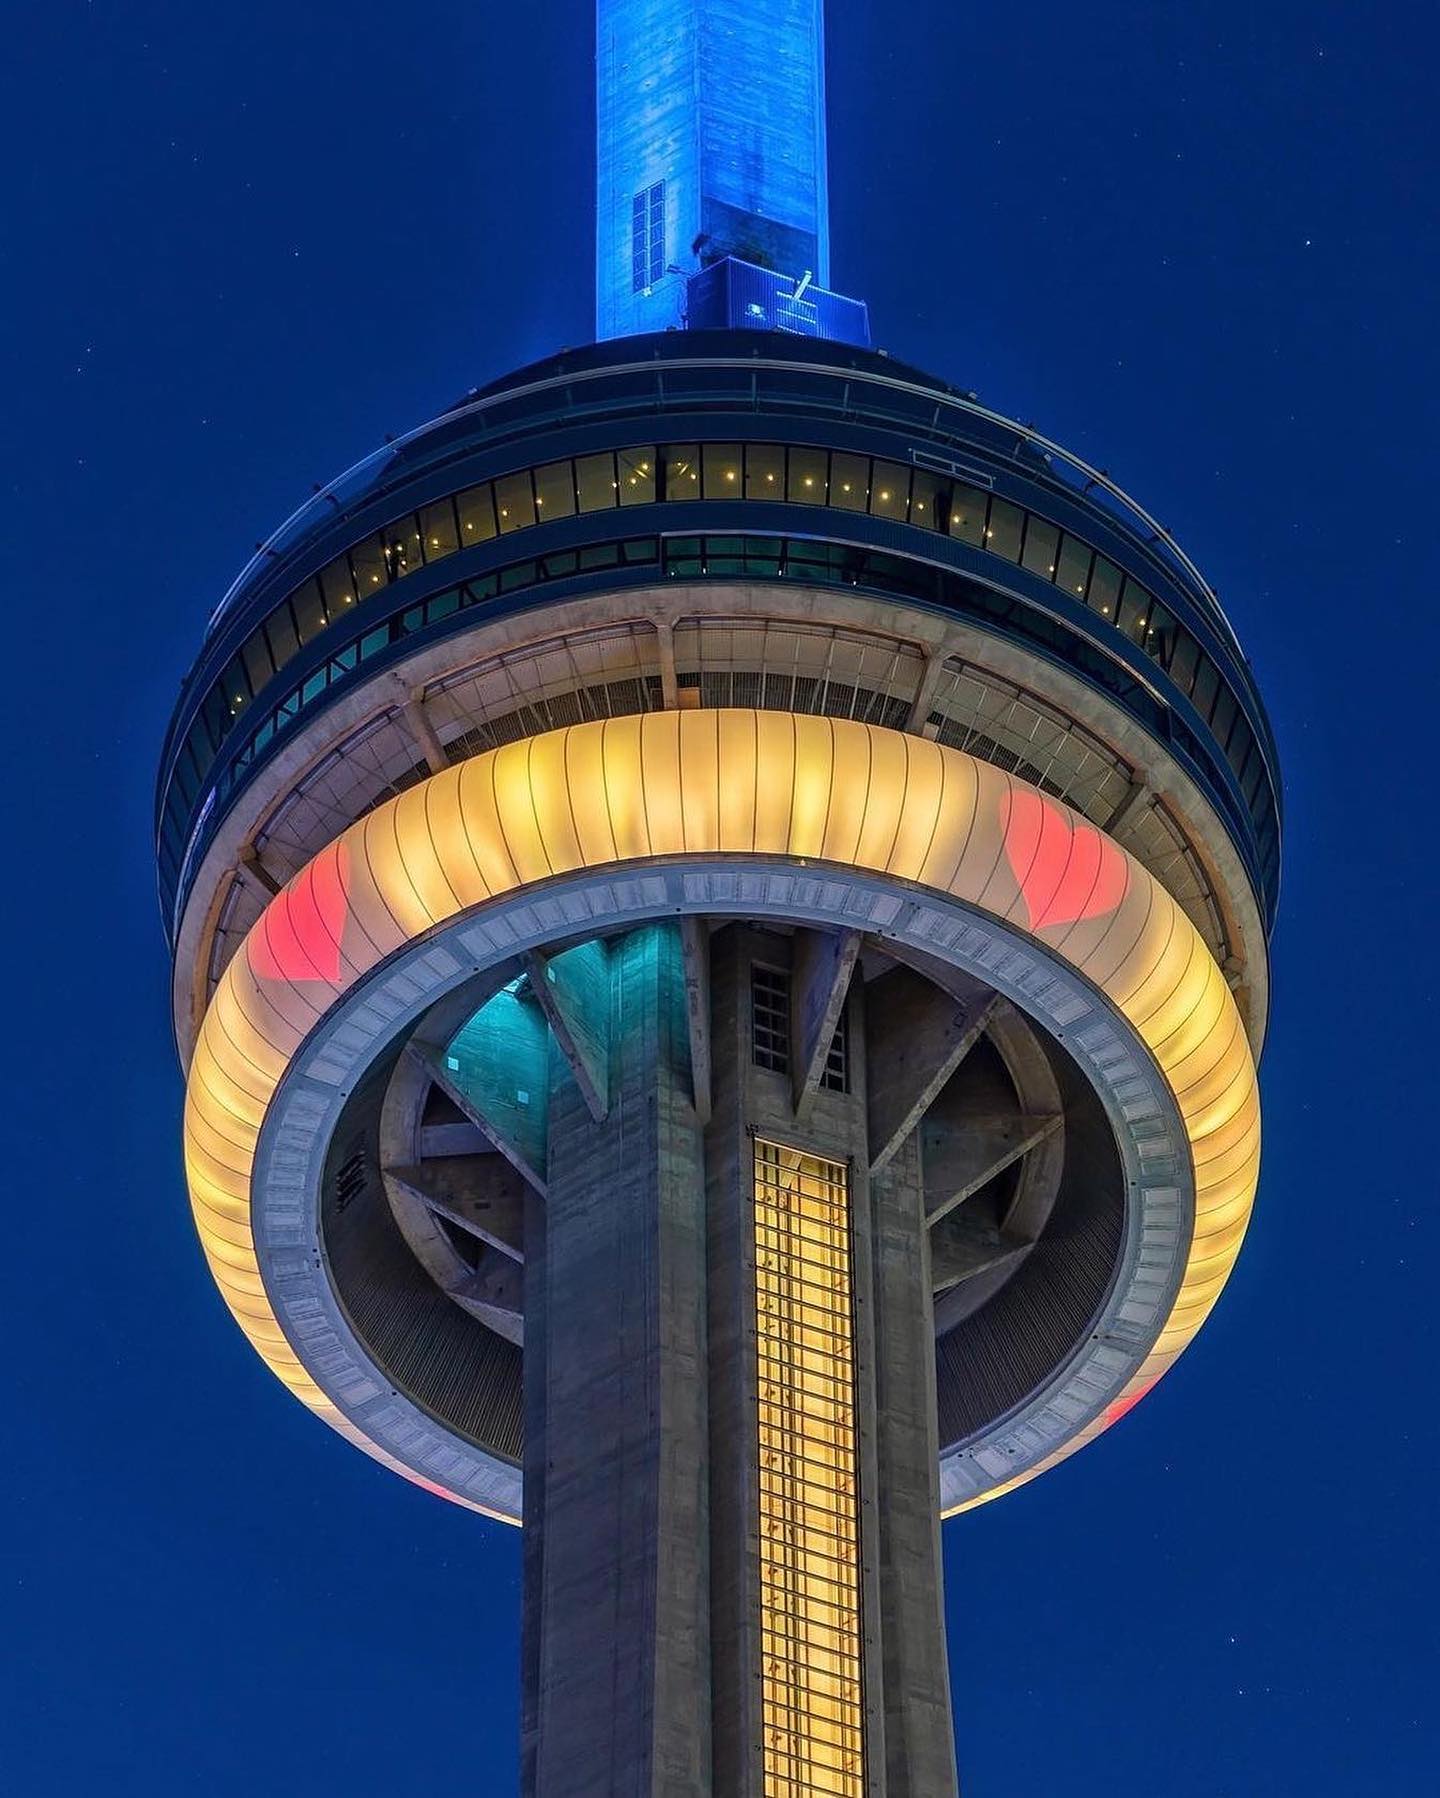 Matthew Harlow on X: The CN Tower was lit in blue and yellow last night in  support for Ukraine. #CNTower #toronto #ukraine  / X